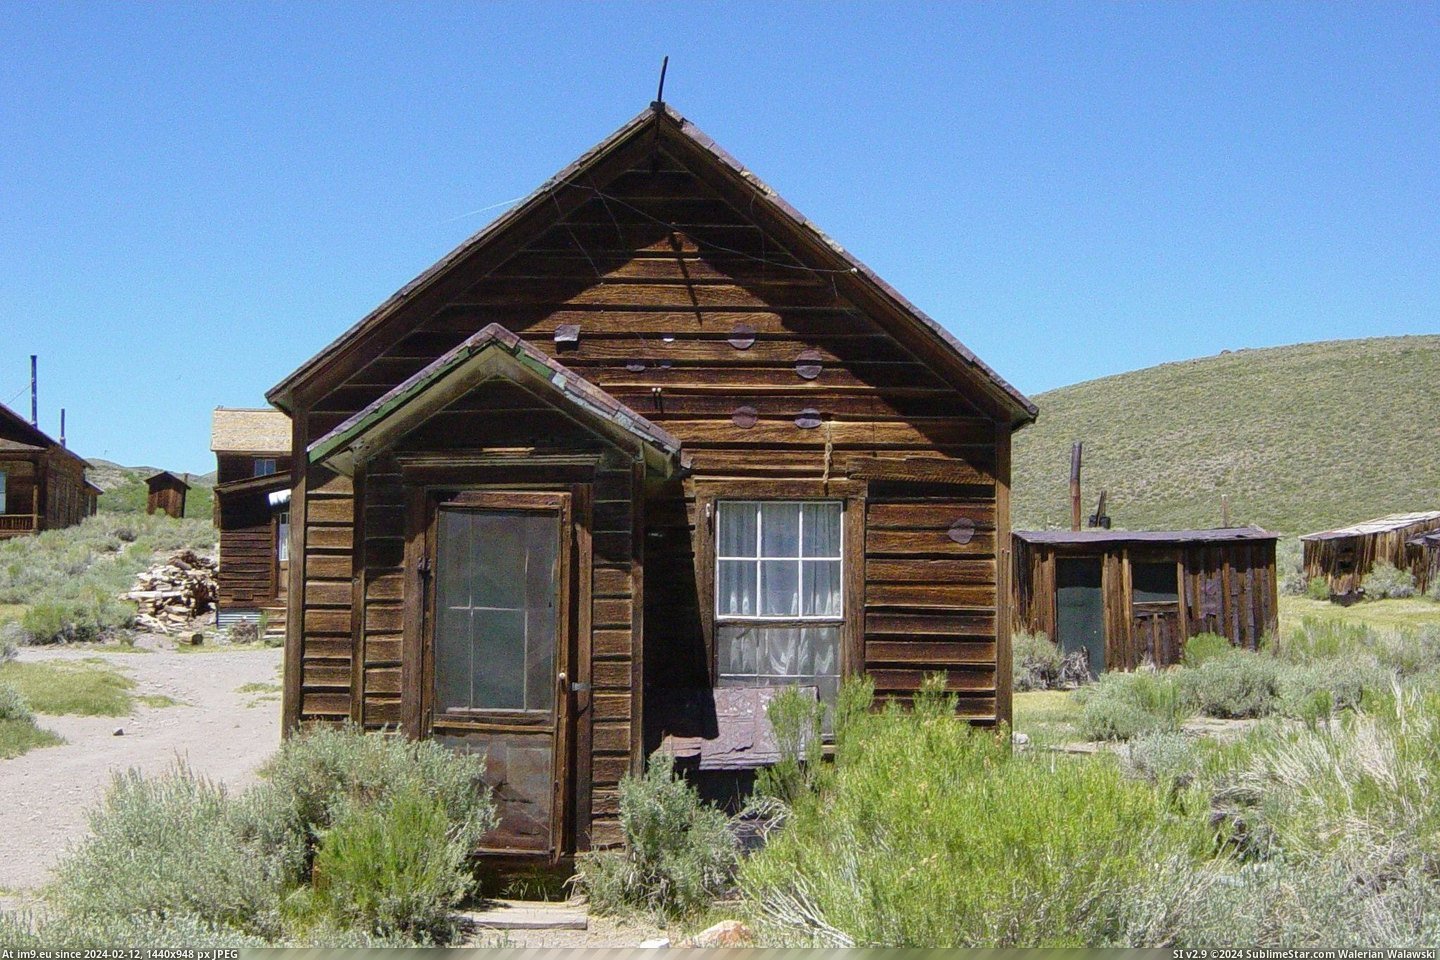 #California #Bodie #Cody #House Cody House In Bodie, California Pic. (Image of album Bodie - a ghost town in Eastern California))